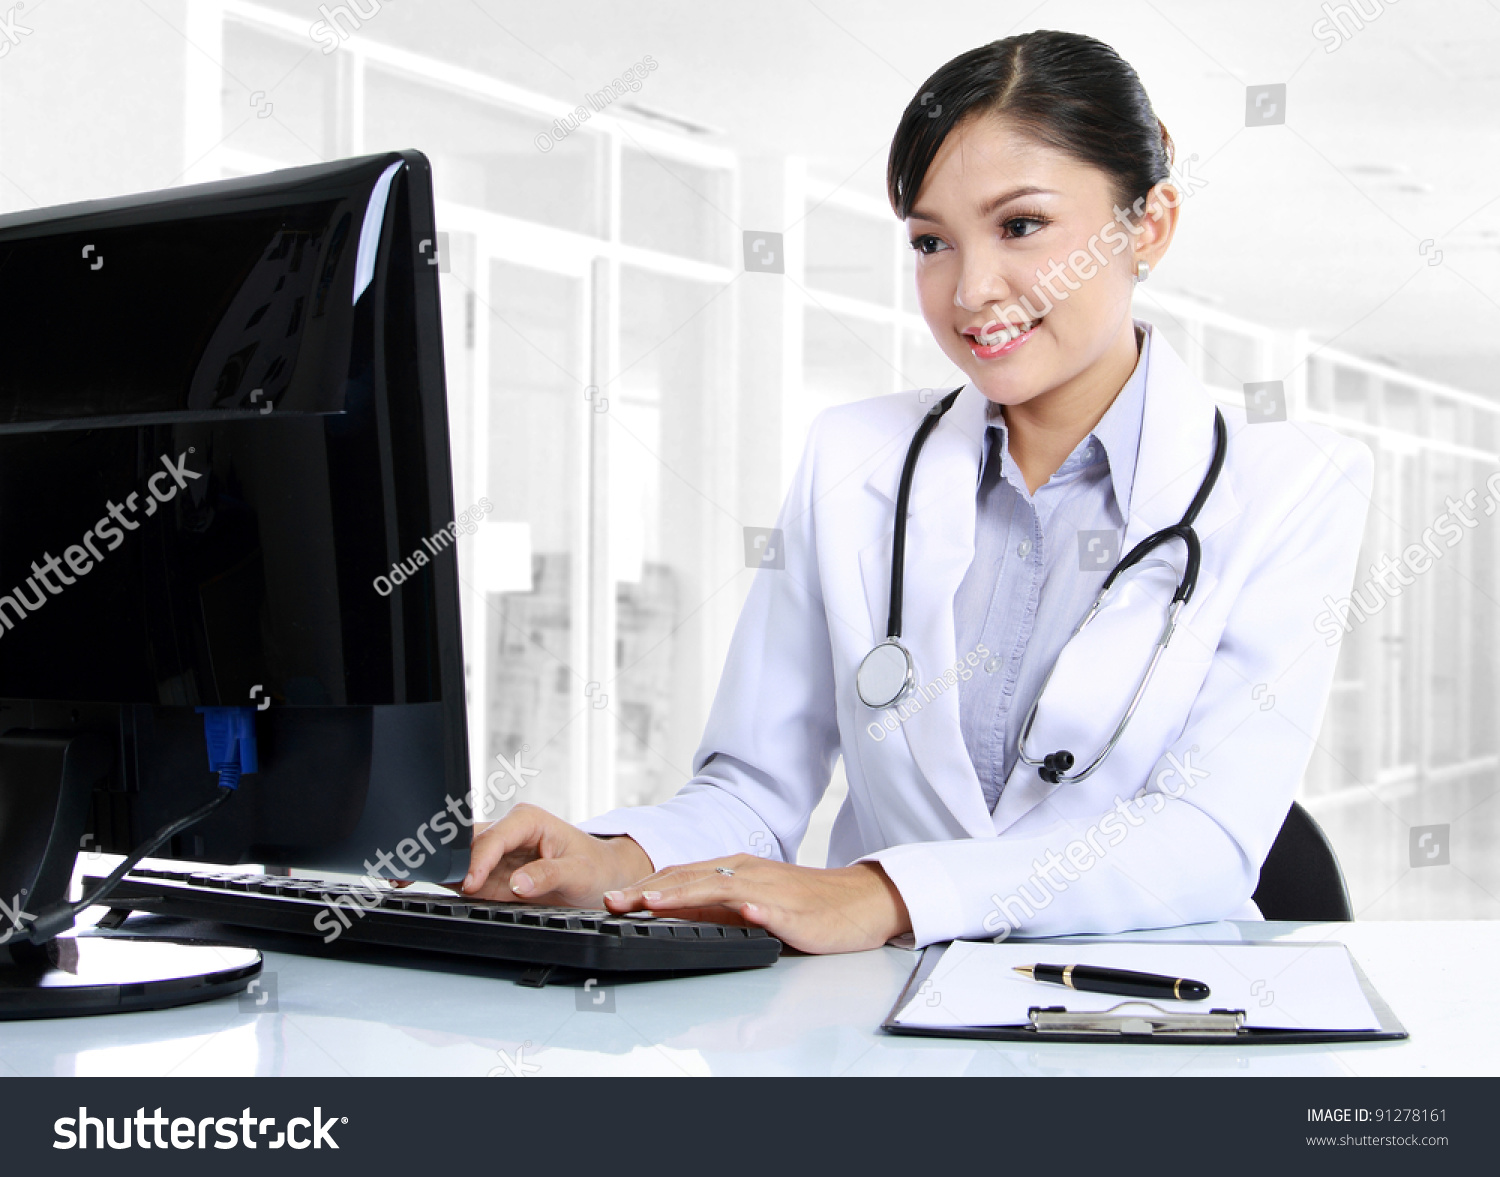 Woman doctor working on a computer